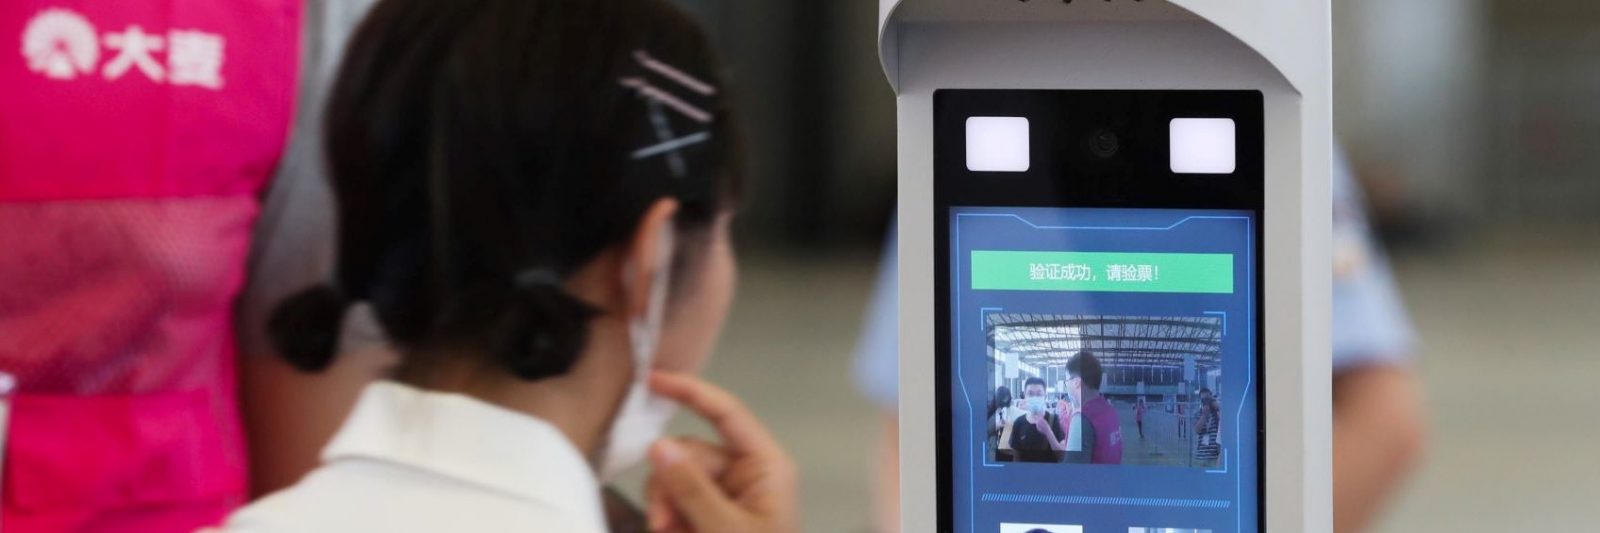 Company Need To Prevail Over Privacy Obstacle For Facial Recognition